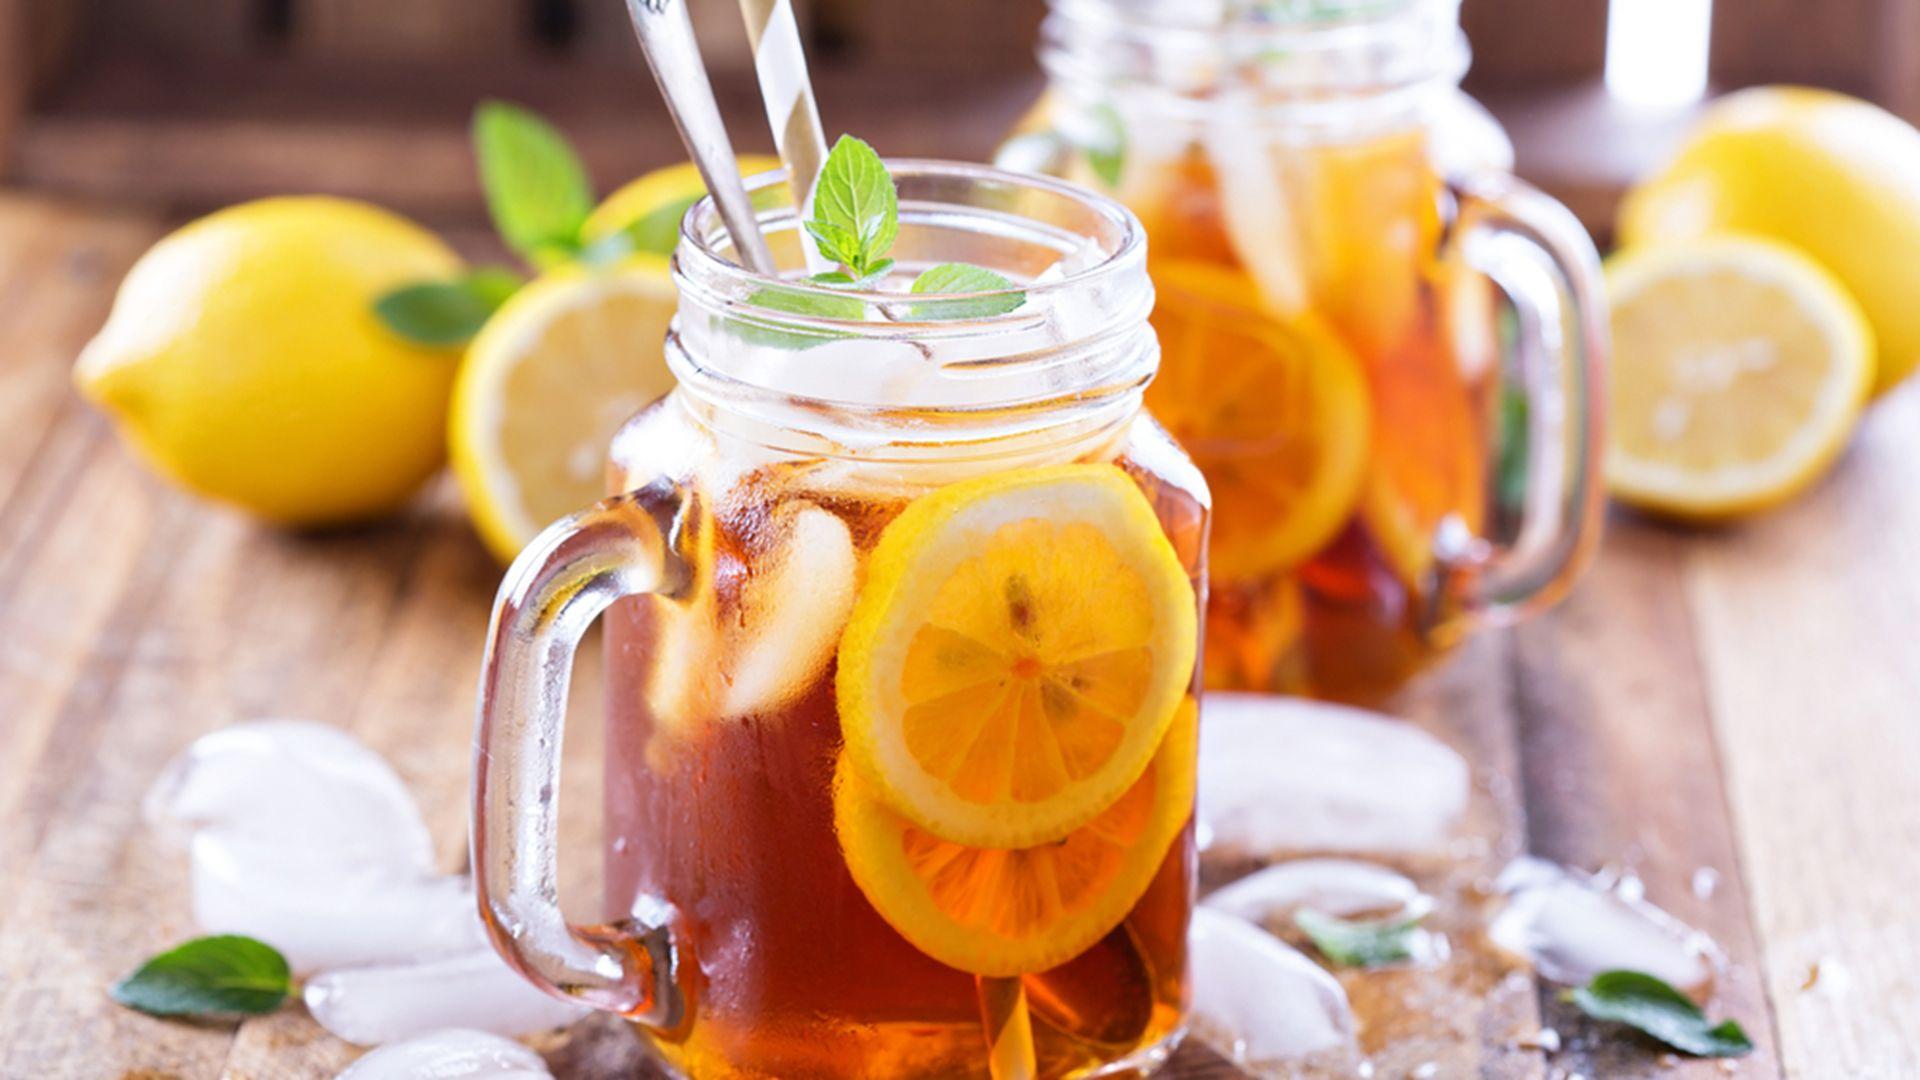 A Refreshing Glass Of Ice Tea Is Always Welcome- The Best In Noida!